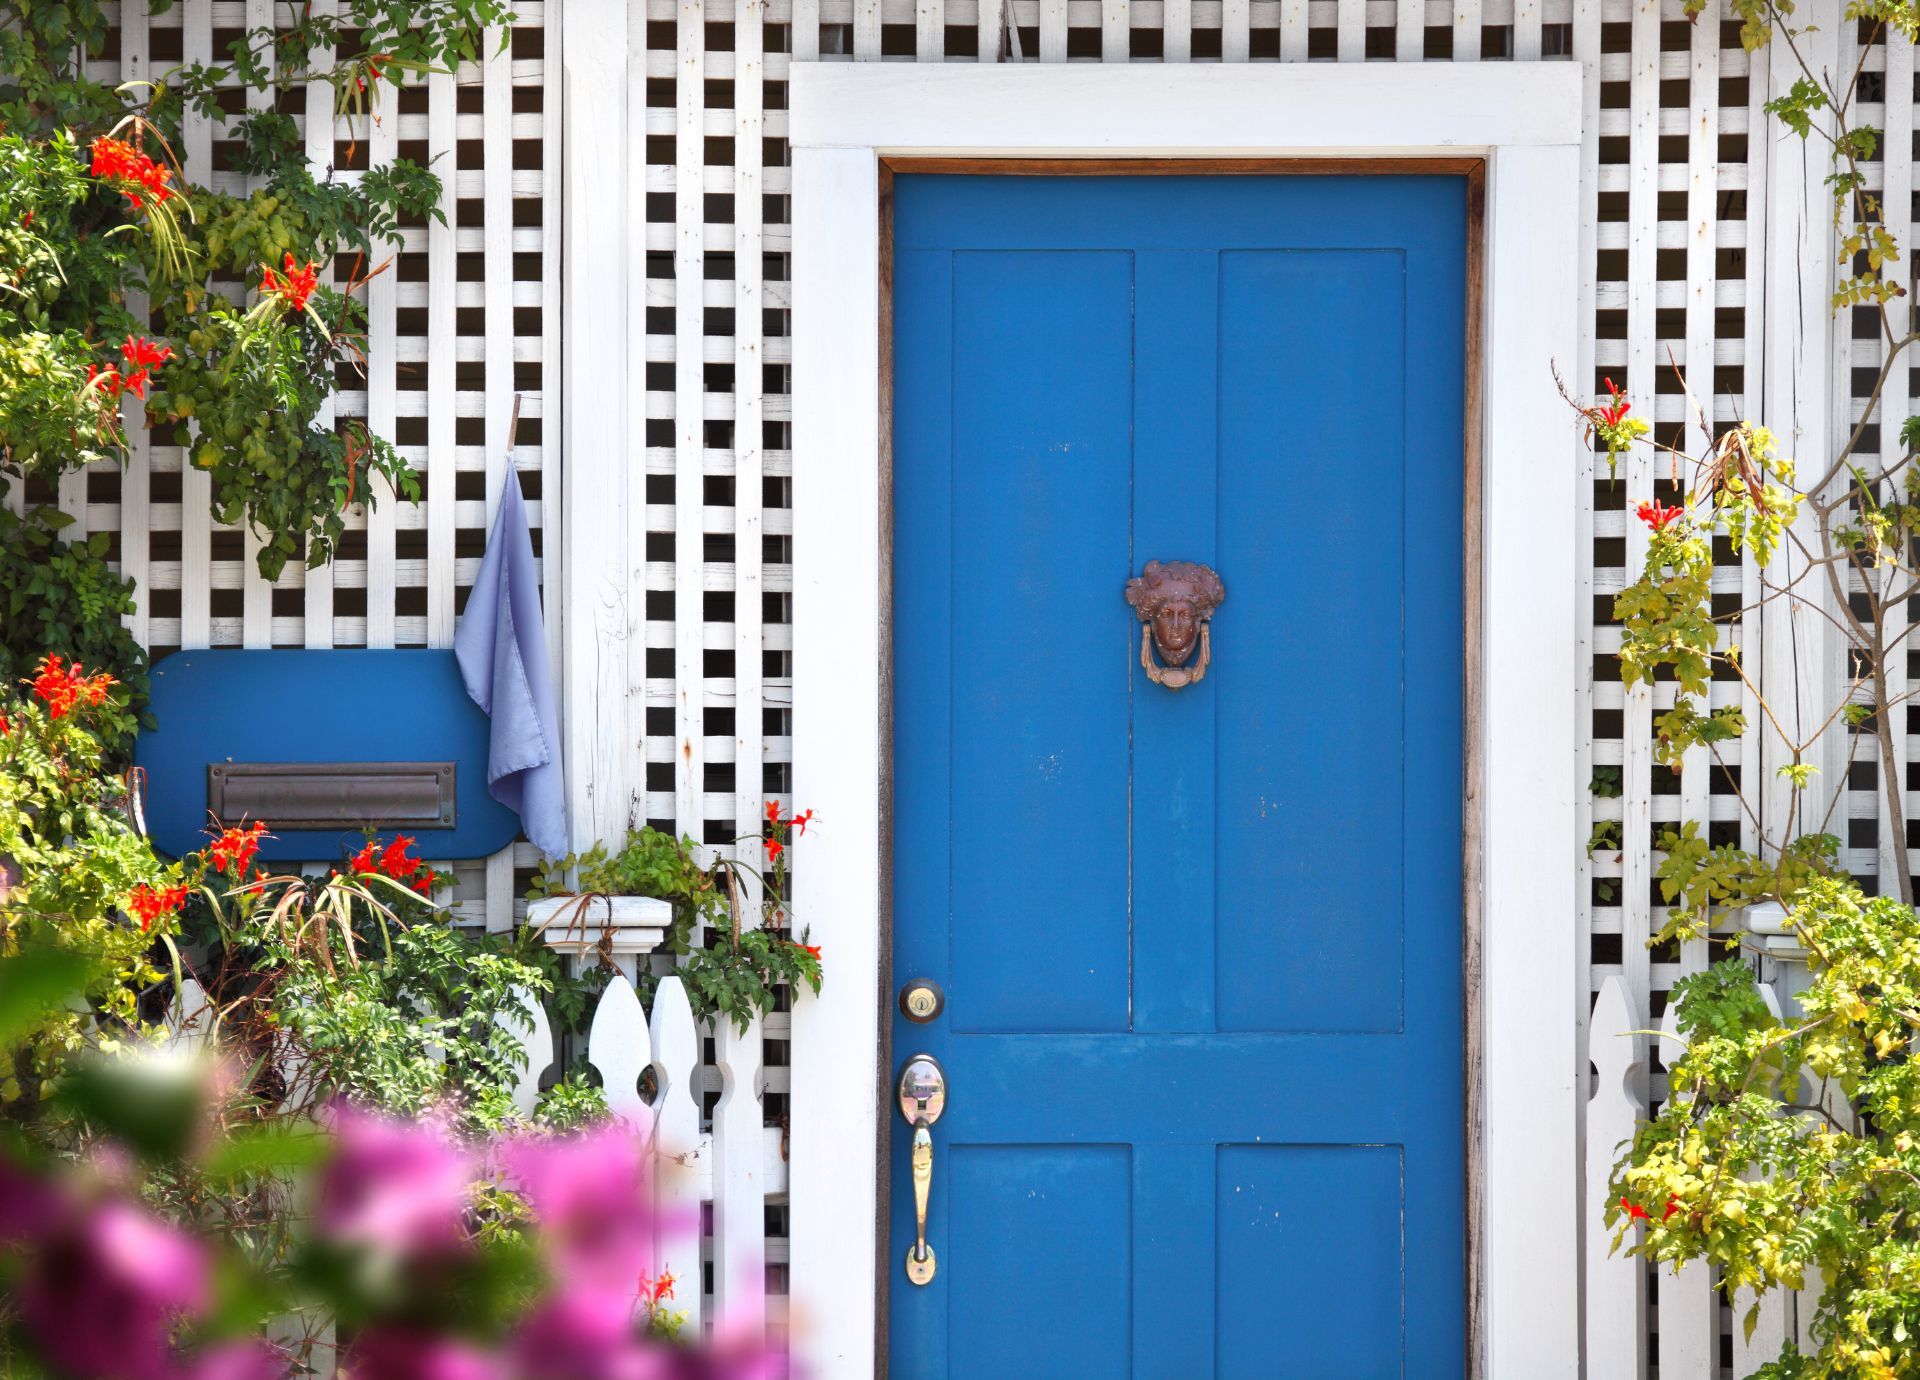 Tip 8: Improve your Curb Appeal